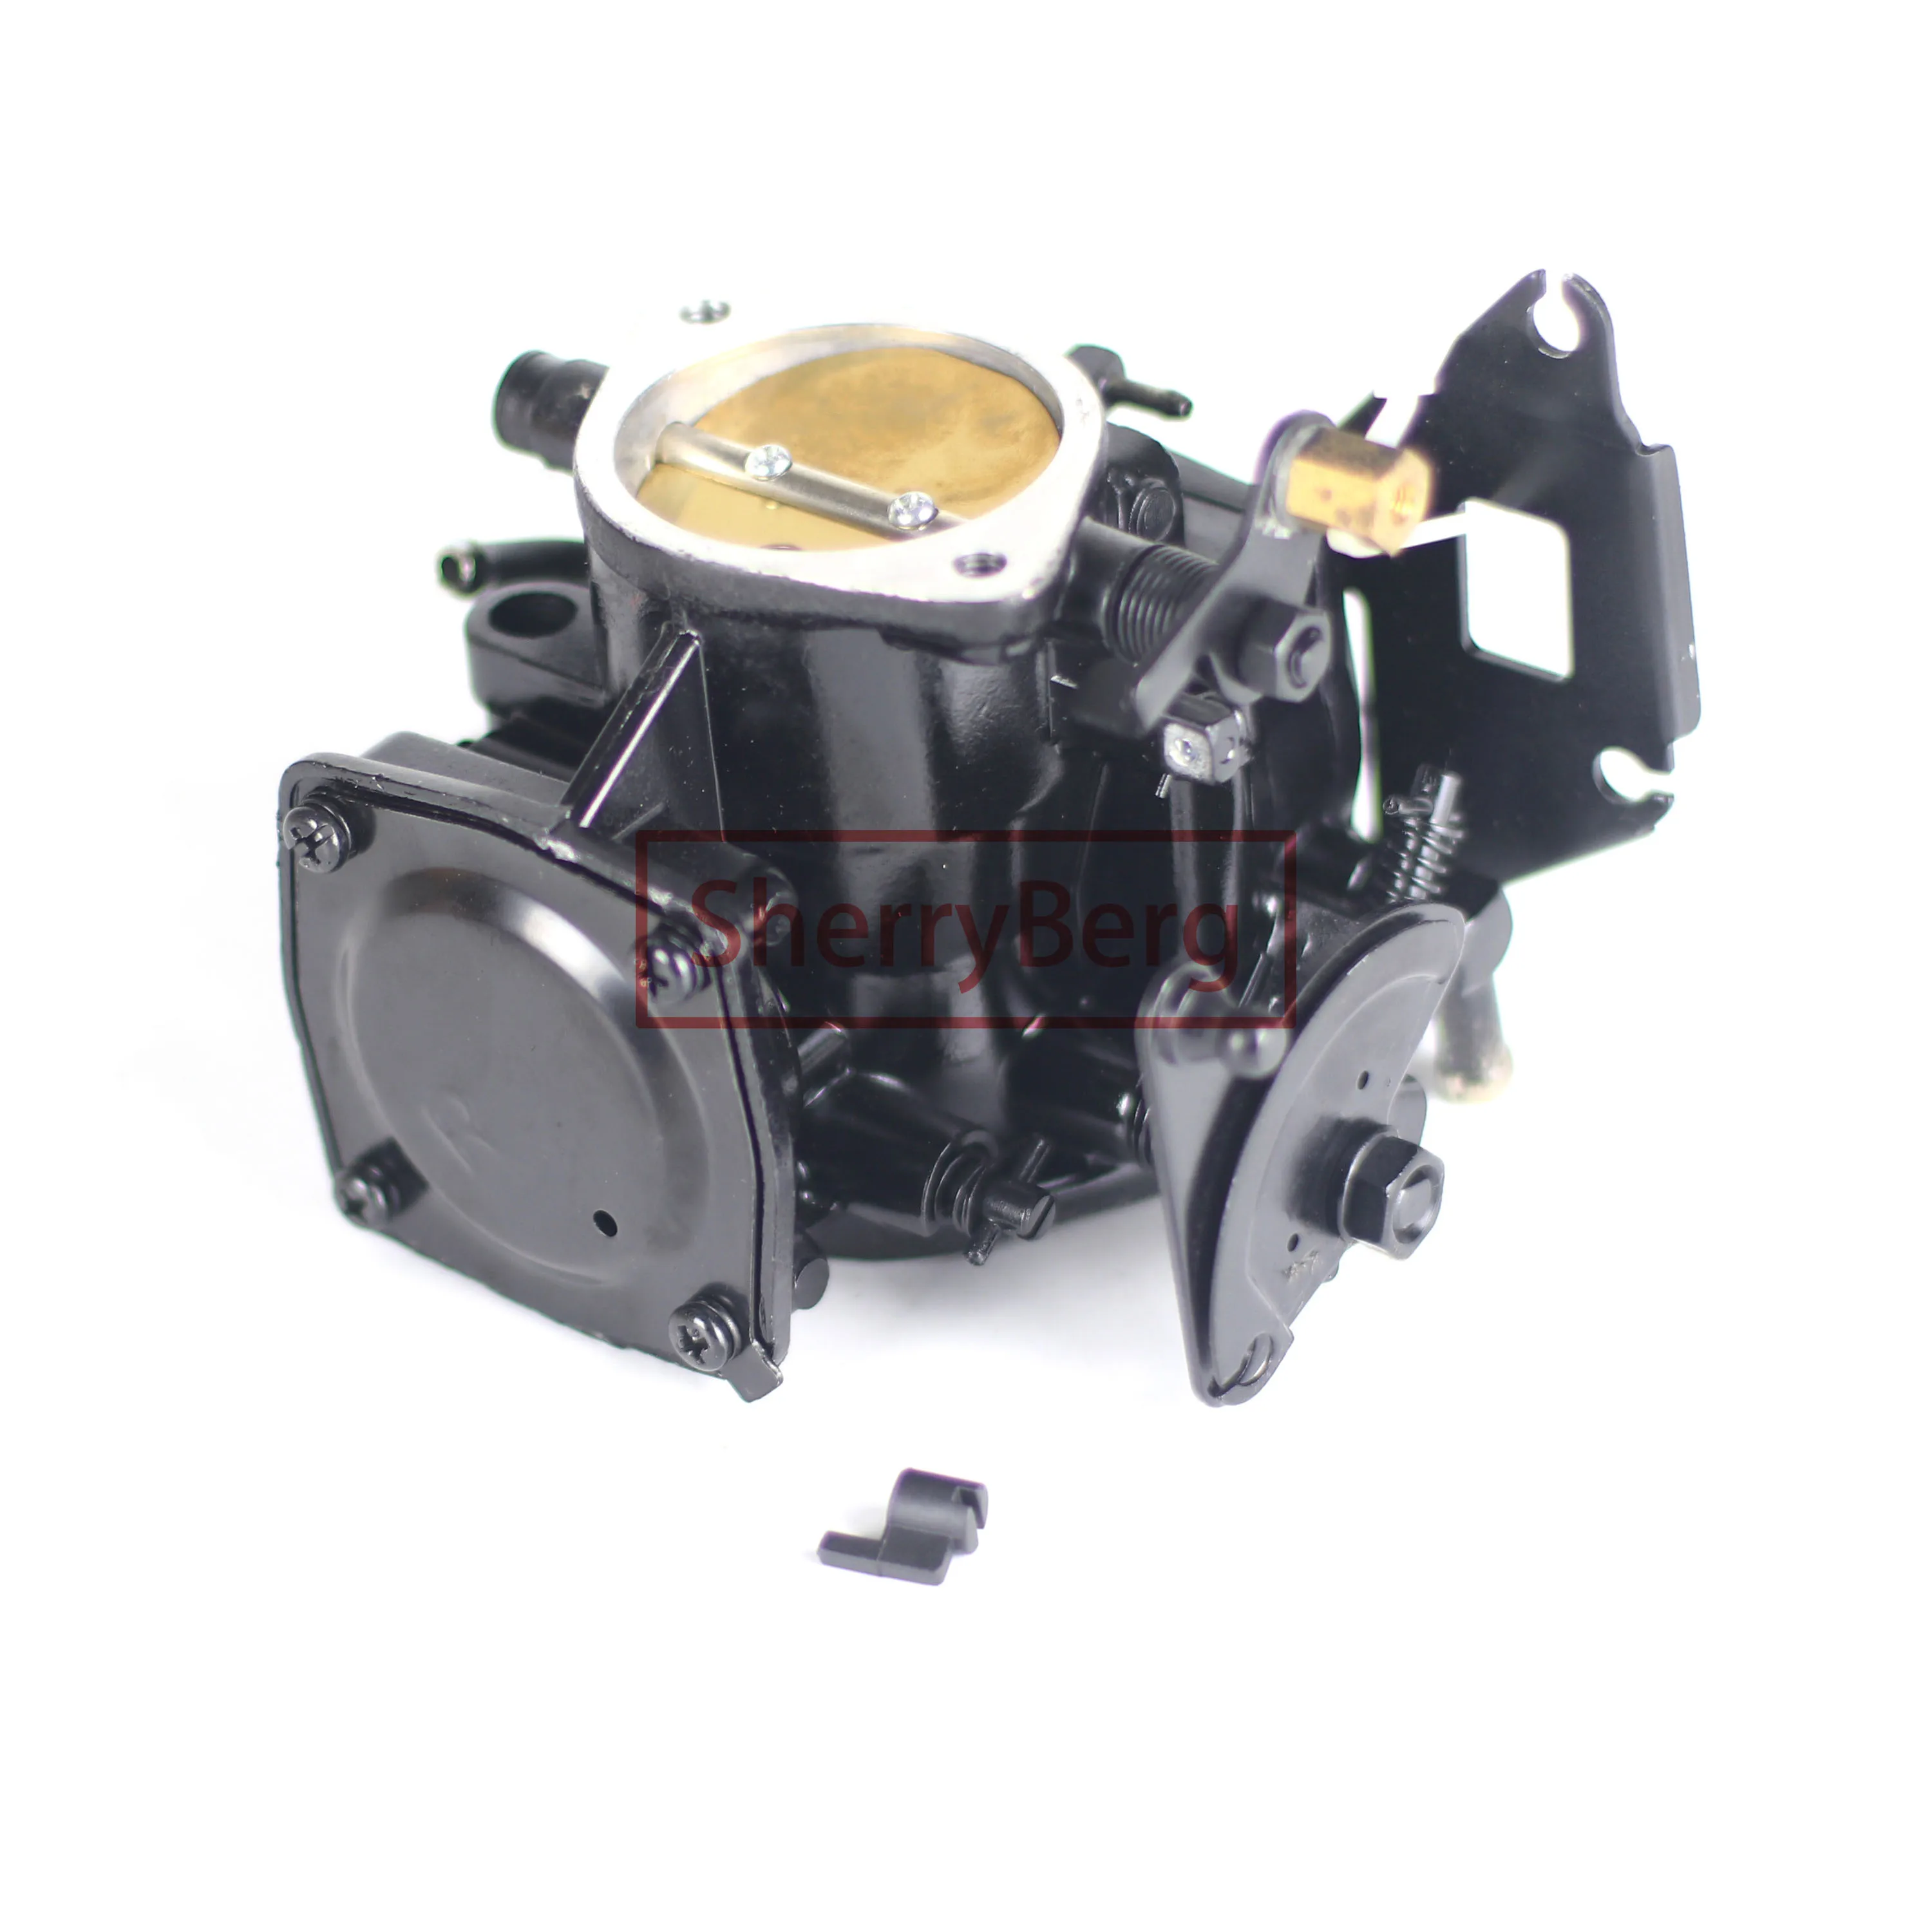 

SherryBerg BN40MM BN40i Carb Carburetor FOR Sea Doo 717 720 GS FOR GTI GTS Sportster Challenger replace MIKUNI BN-40 CARBURETTOR